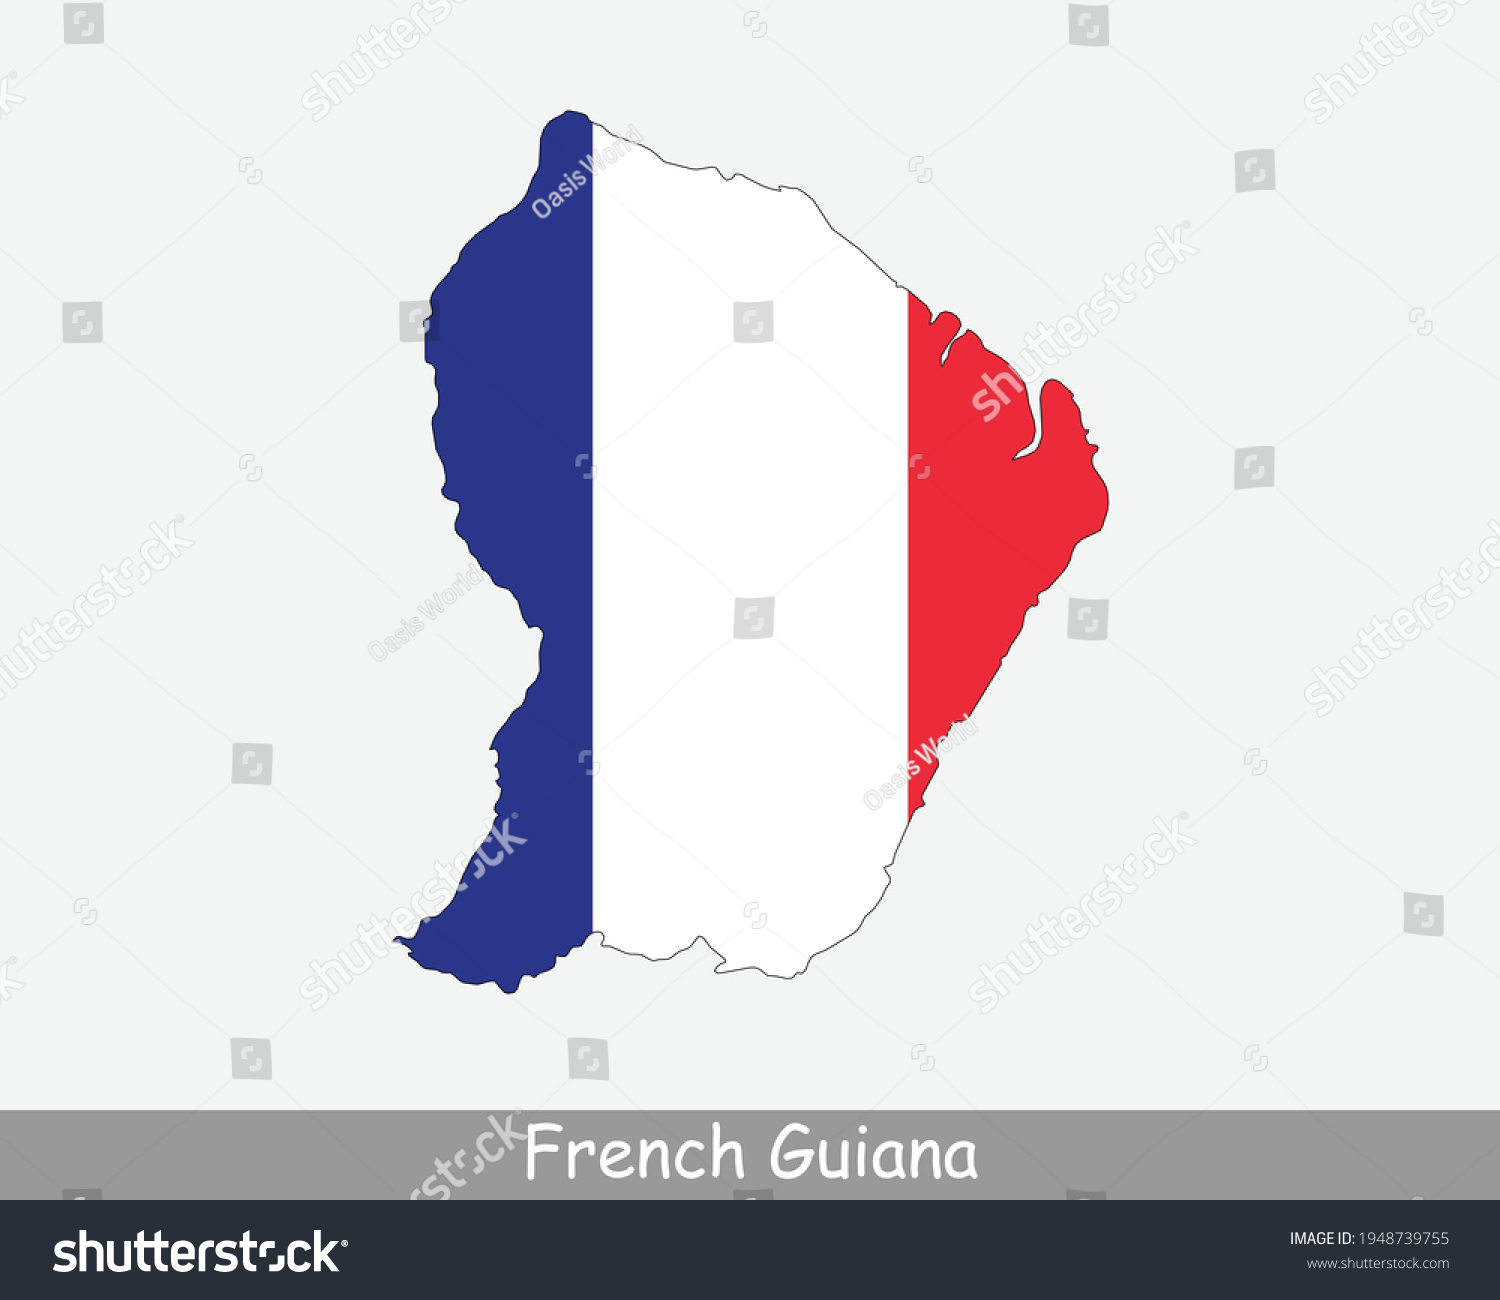 SVG of French Guiana Map Flag. Map of Guyane with French flag isolated on white background. Overseas department, region and single territorial collectivity of France. Vector illustration. svg